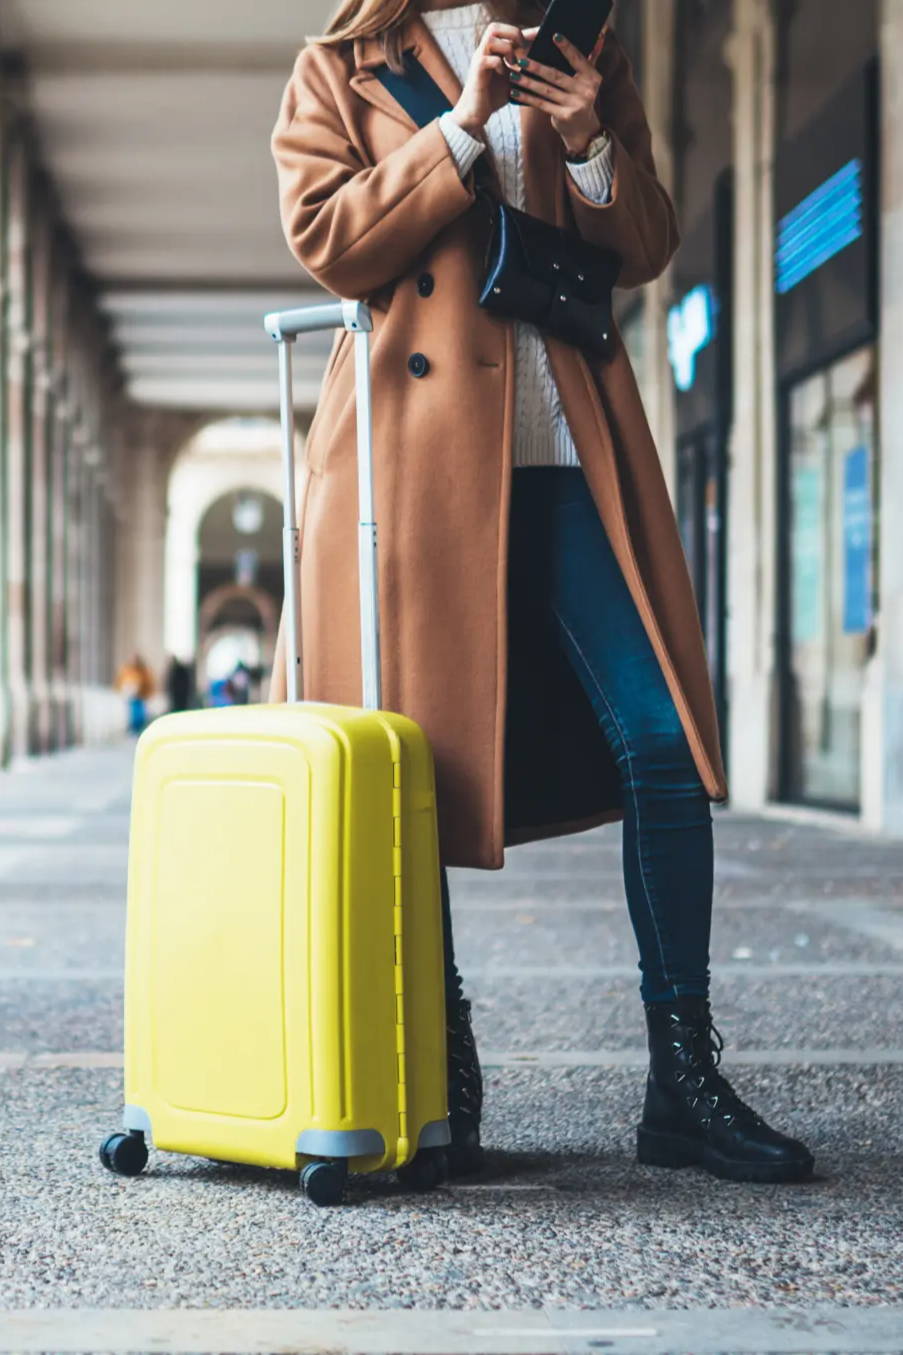 Woman on phone traveling with suitcase